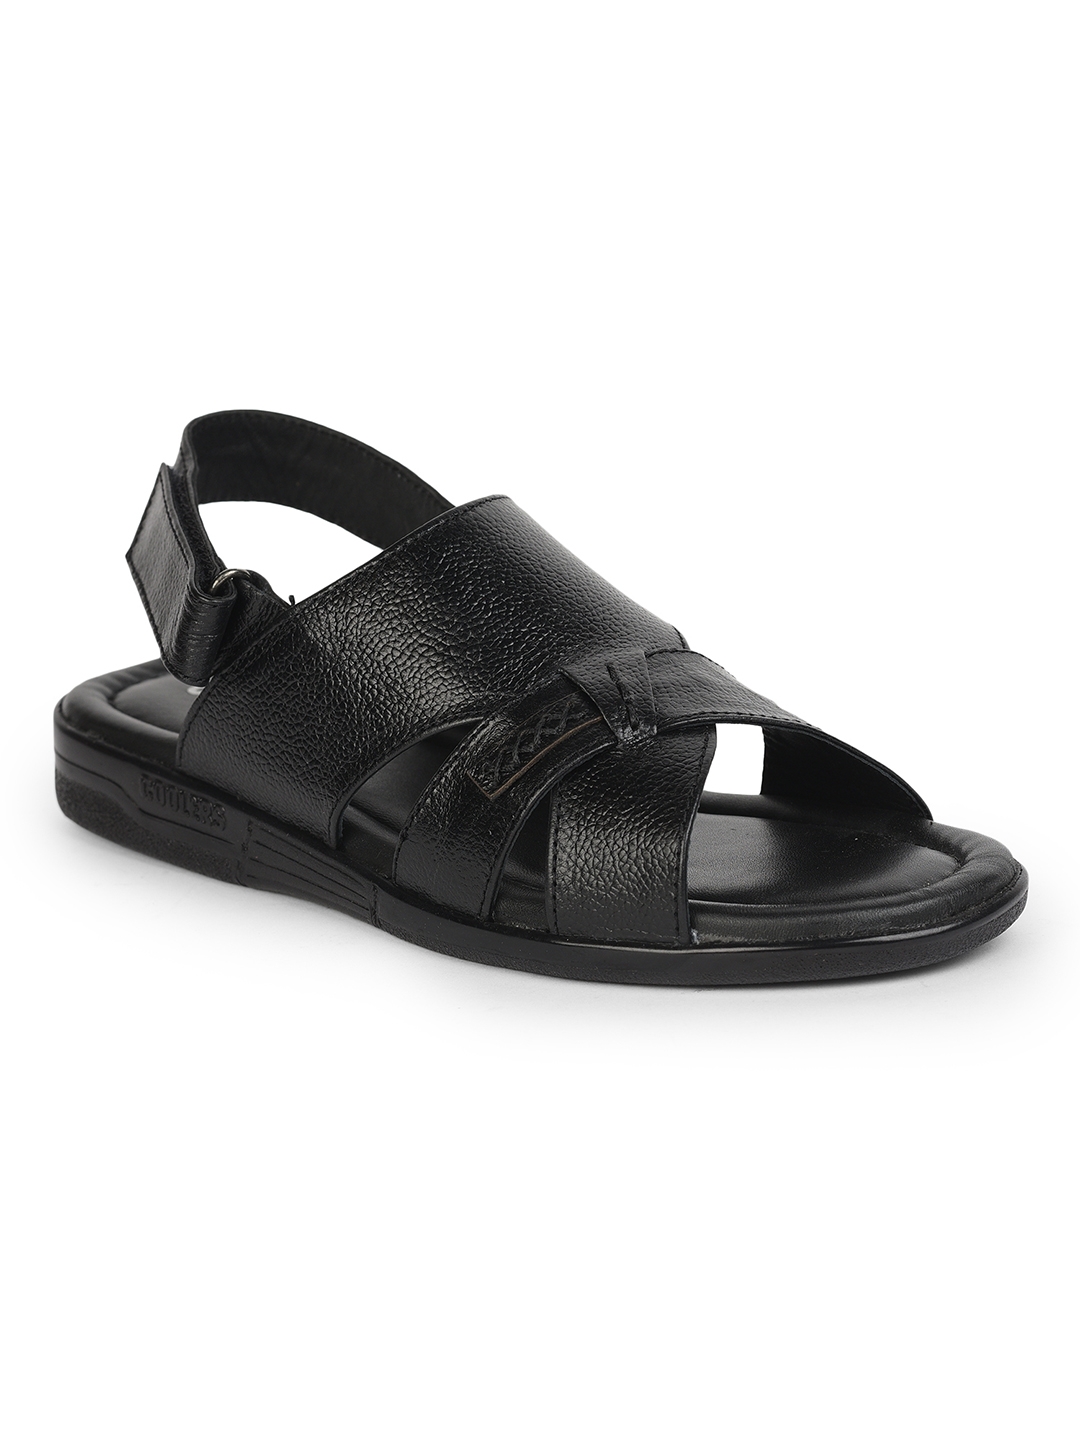 Liberty | Coolers by Liberty Black Sandals 7194-103 For :- Men